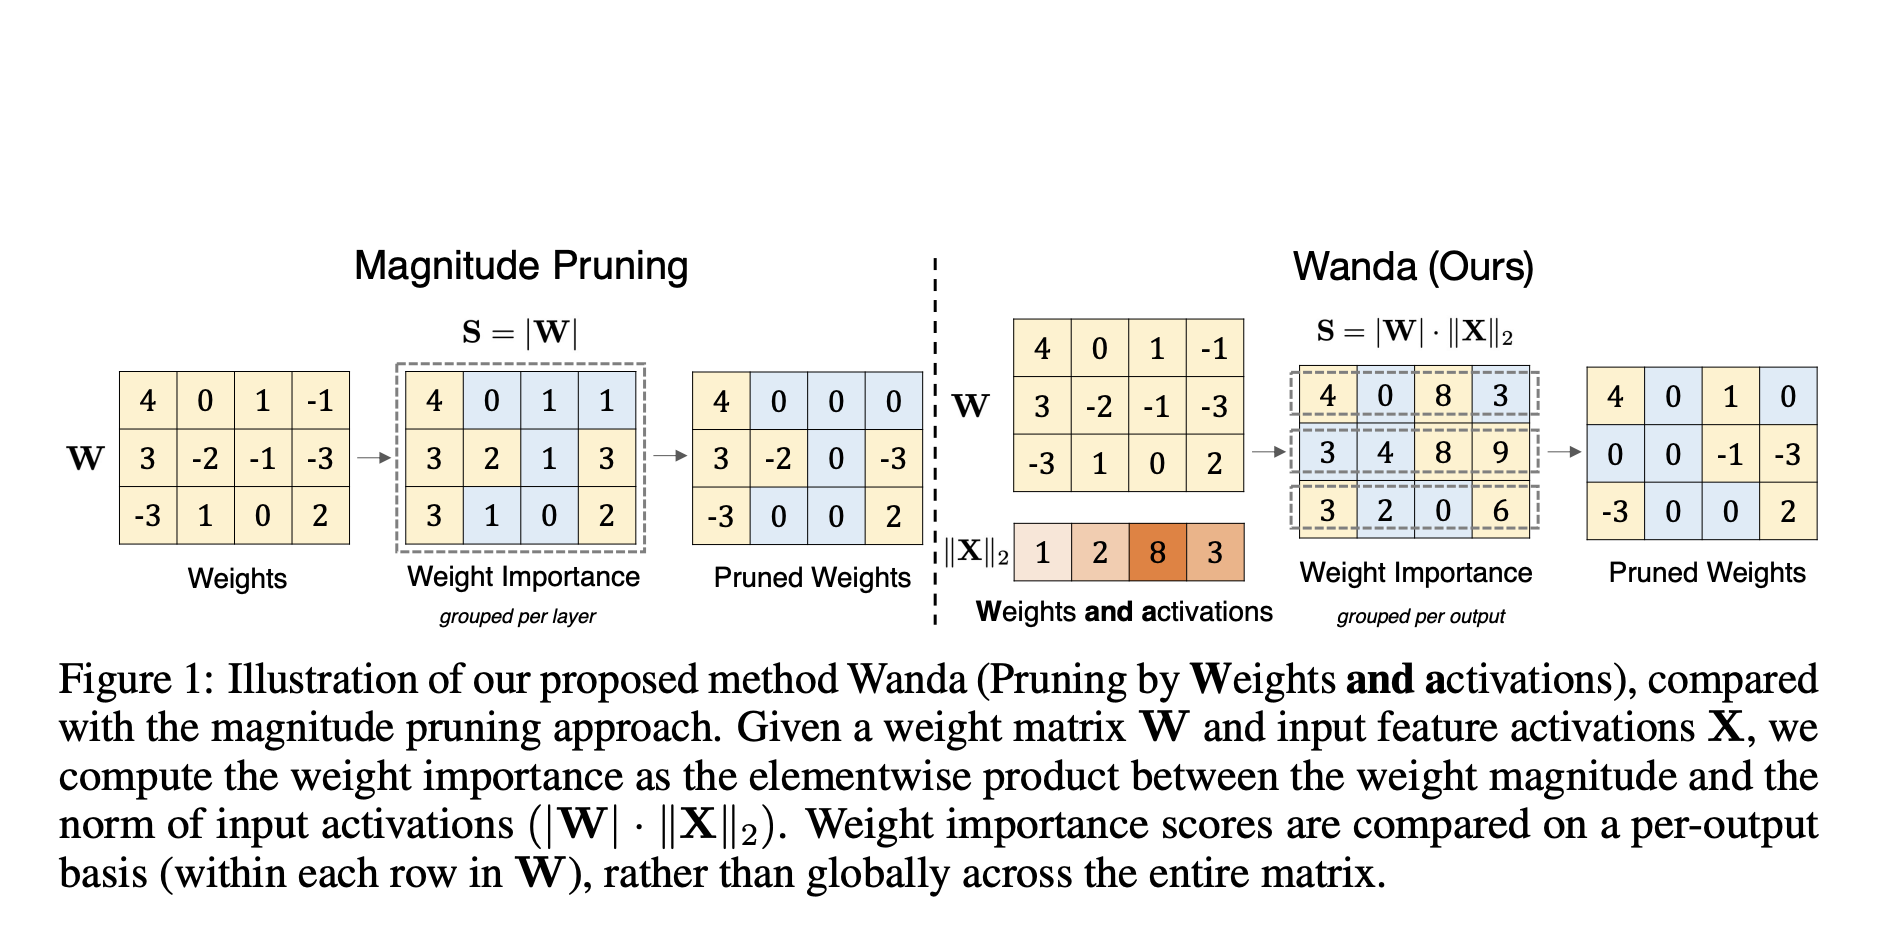 Meet Wanda: A Simple and Effective Pruning Approach for Large Language Models